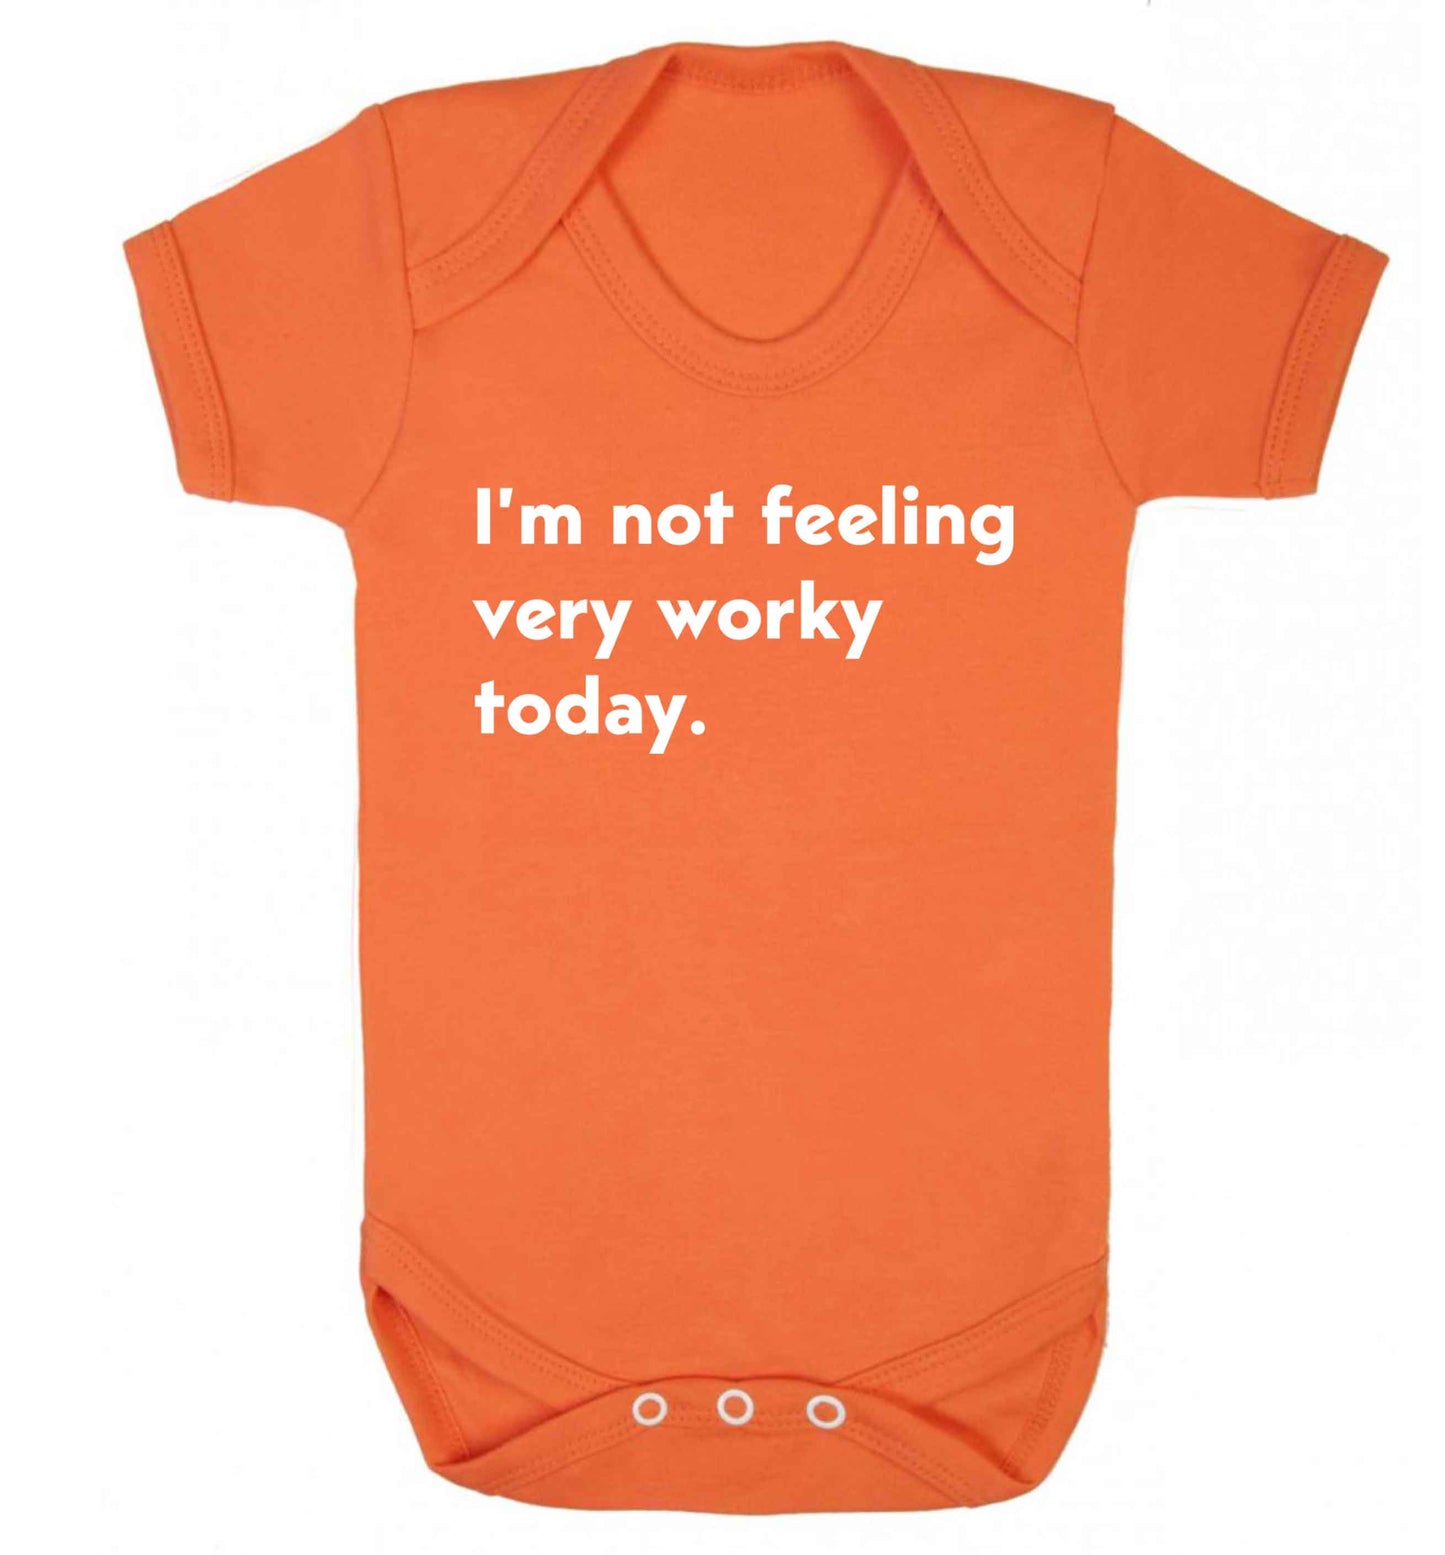 I'm not feeling very worky today Baby Vest orange 18-24 months